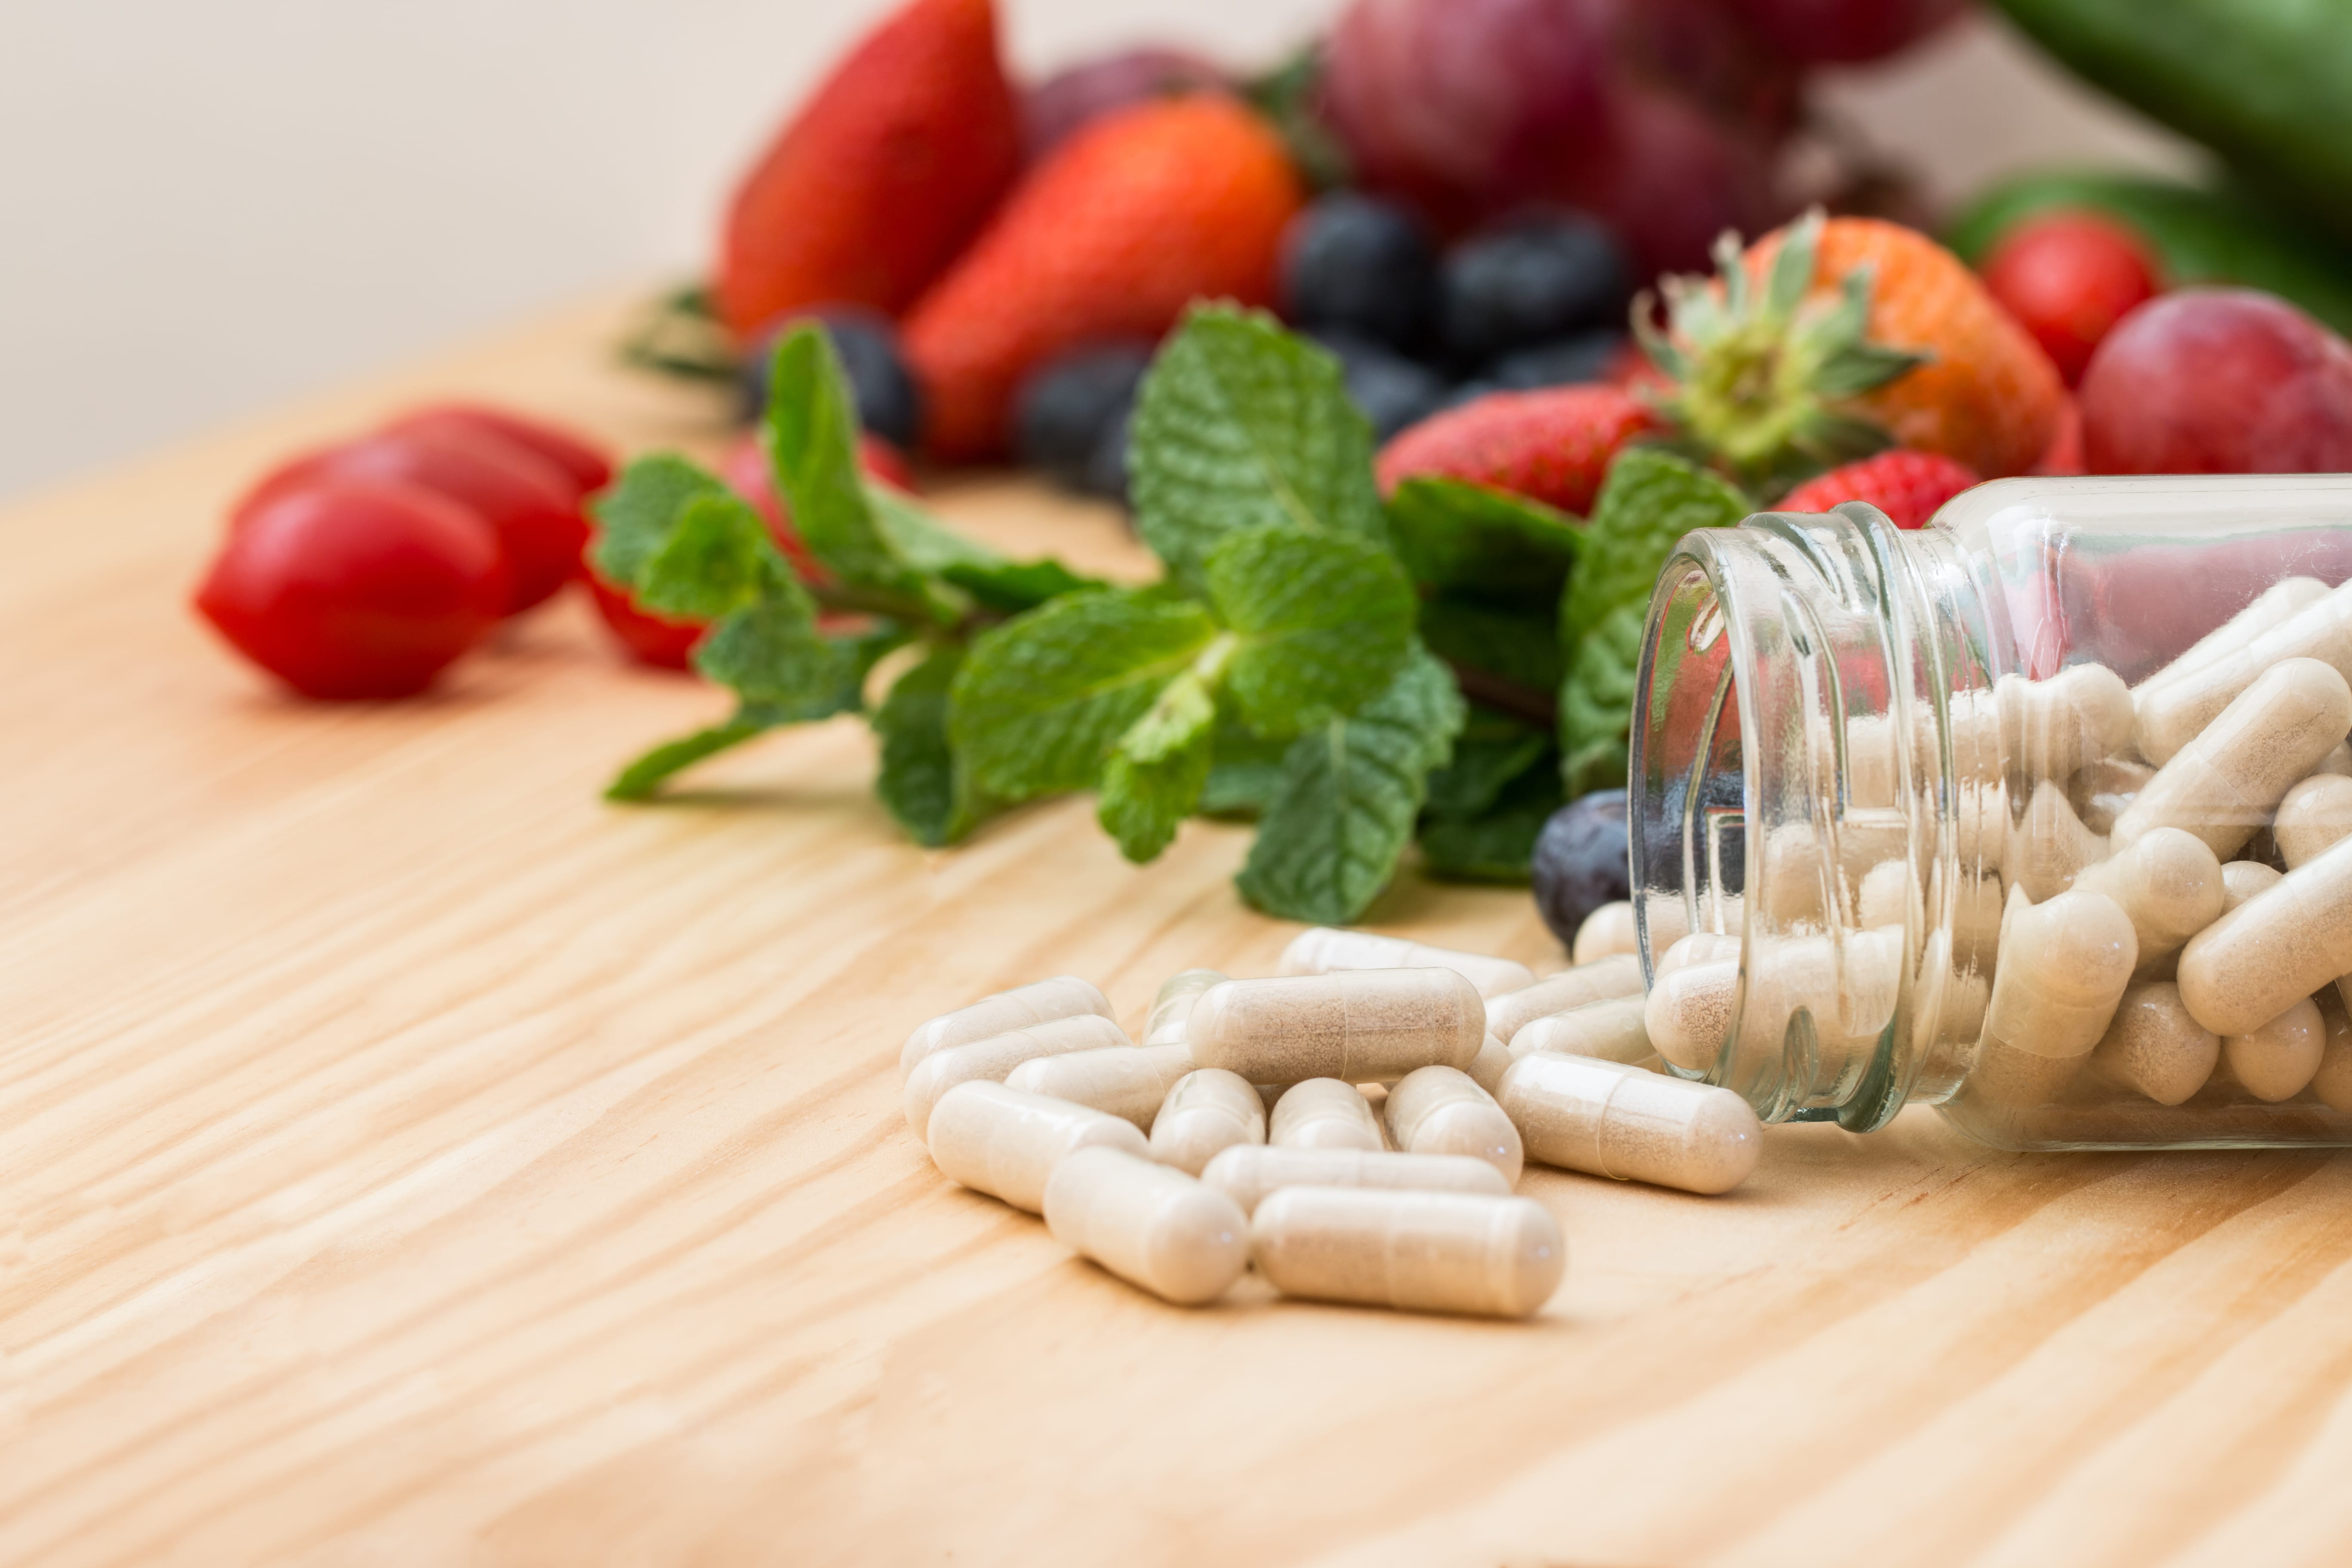 Best Probiotics to Support Your Digestive and Immune Systems